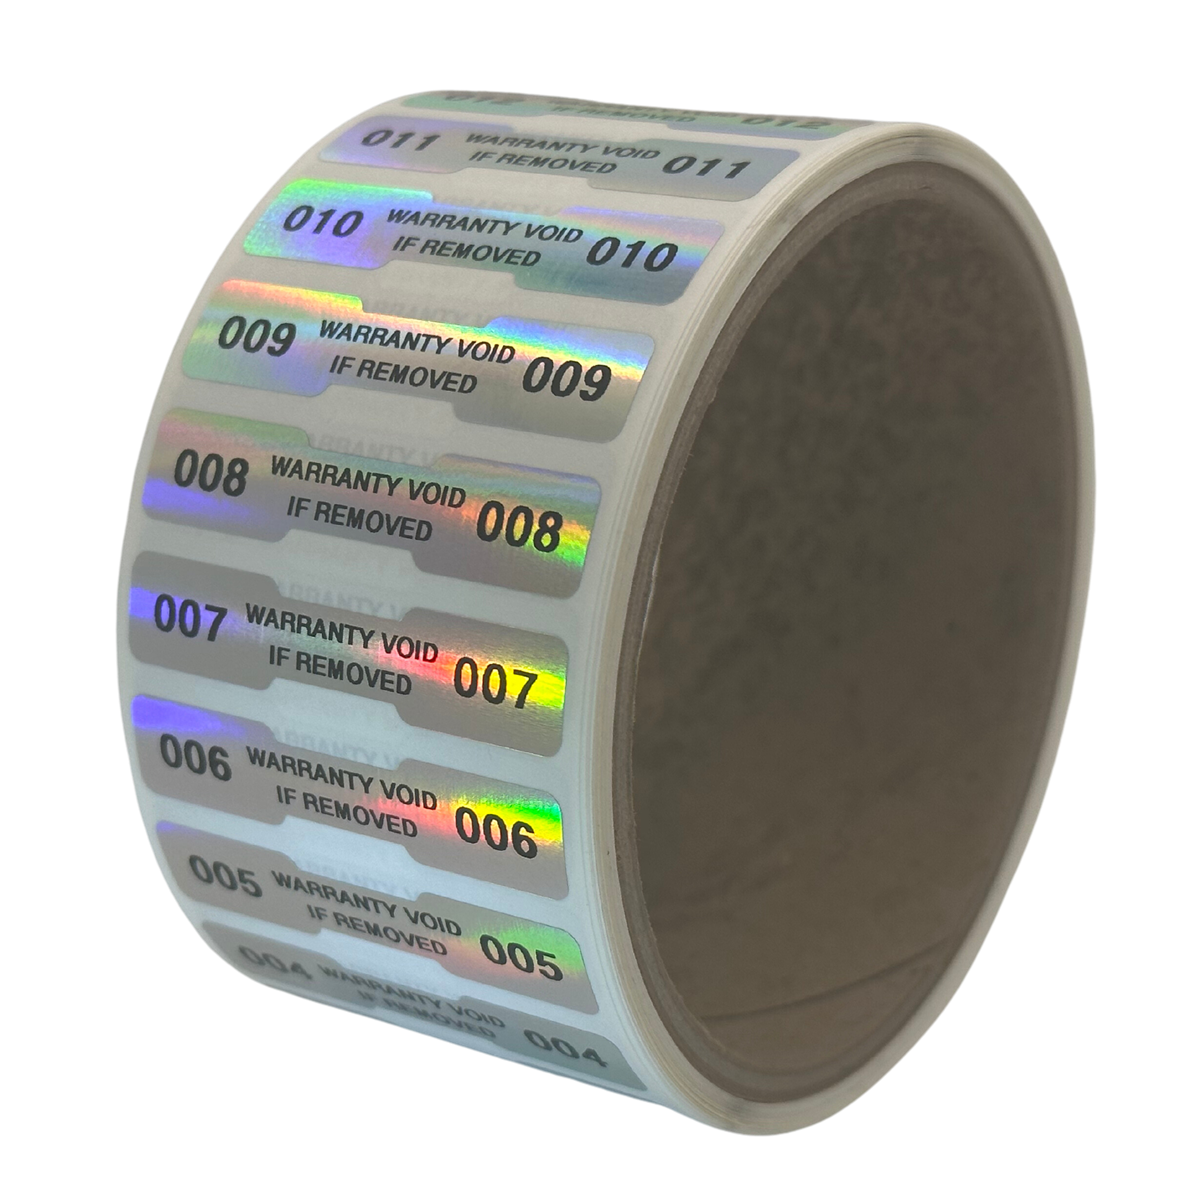 5,000 Tamper Evident Rainbow Non Residue Security Labels TamperGuard® Seal Sticker, Dogbone 1.75" x 0.375" (44mm x 9mm). Printed: Warranty Void if Removed + Serialized